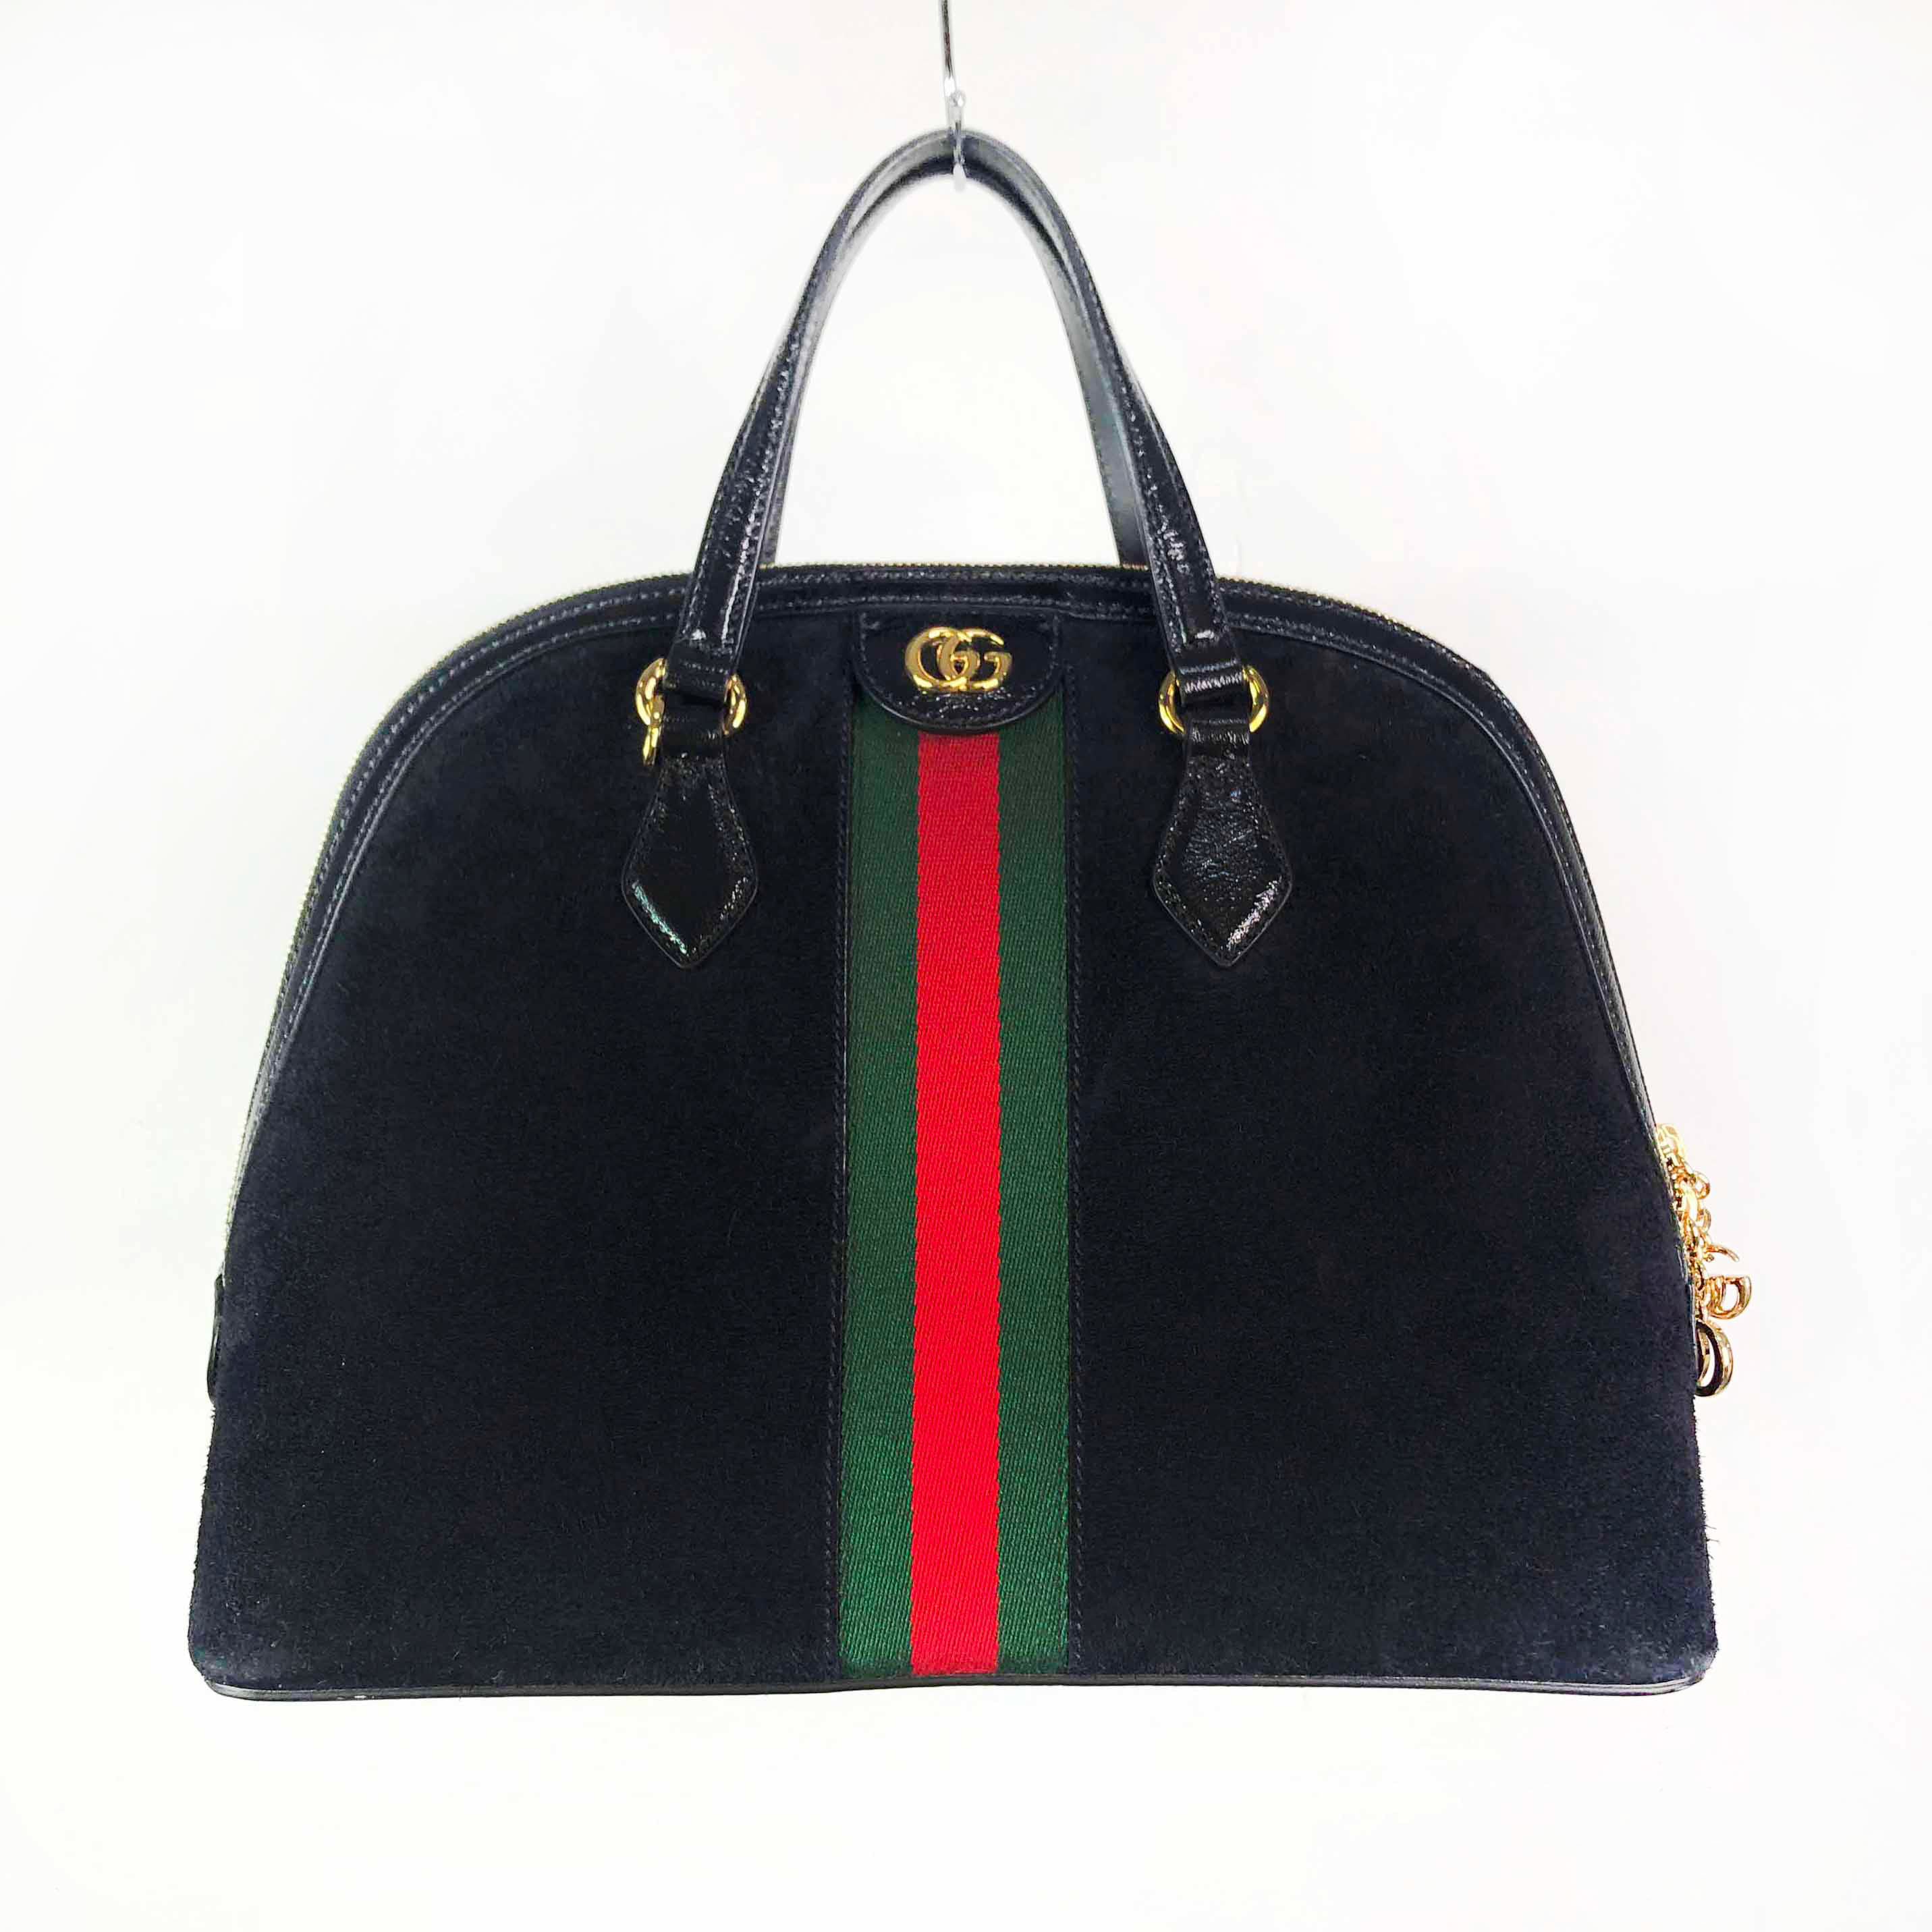 [Gucci] Ophidia GG Suede Cross-body Bag BK